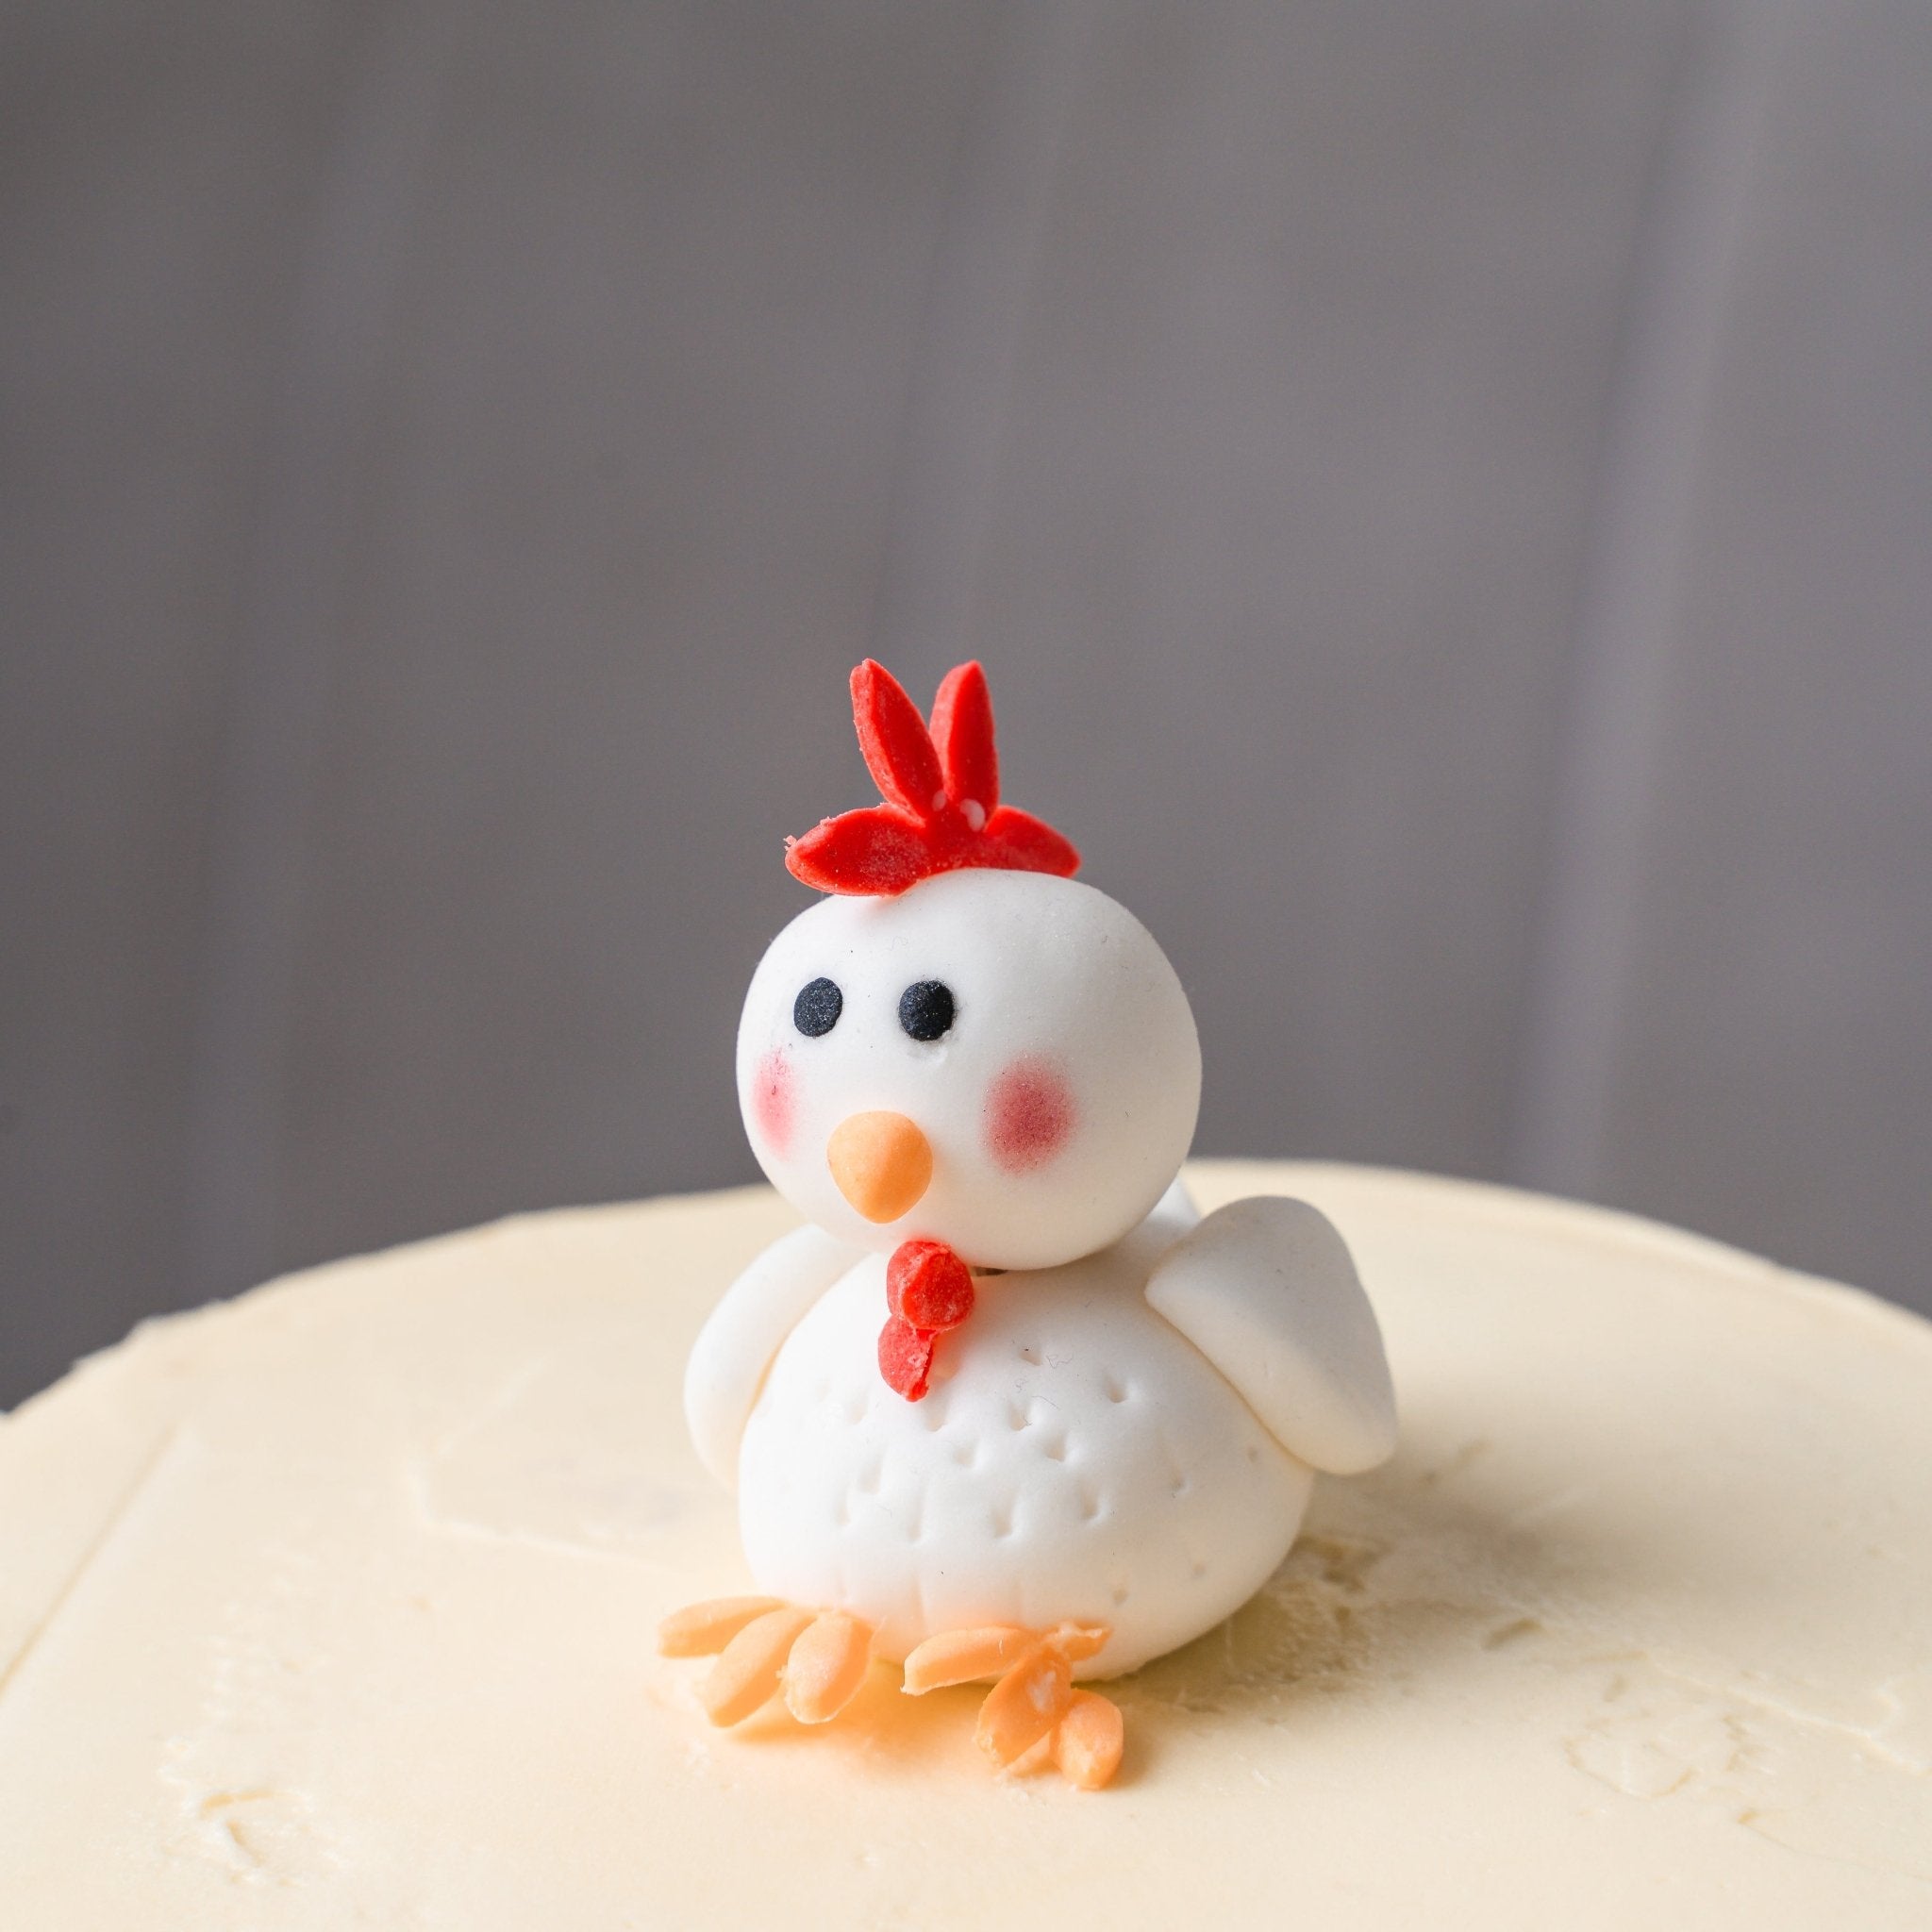 3D Animal Figure Cake - Chicken - Jack and Beyond